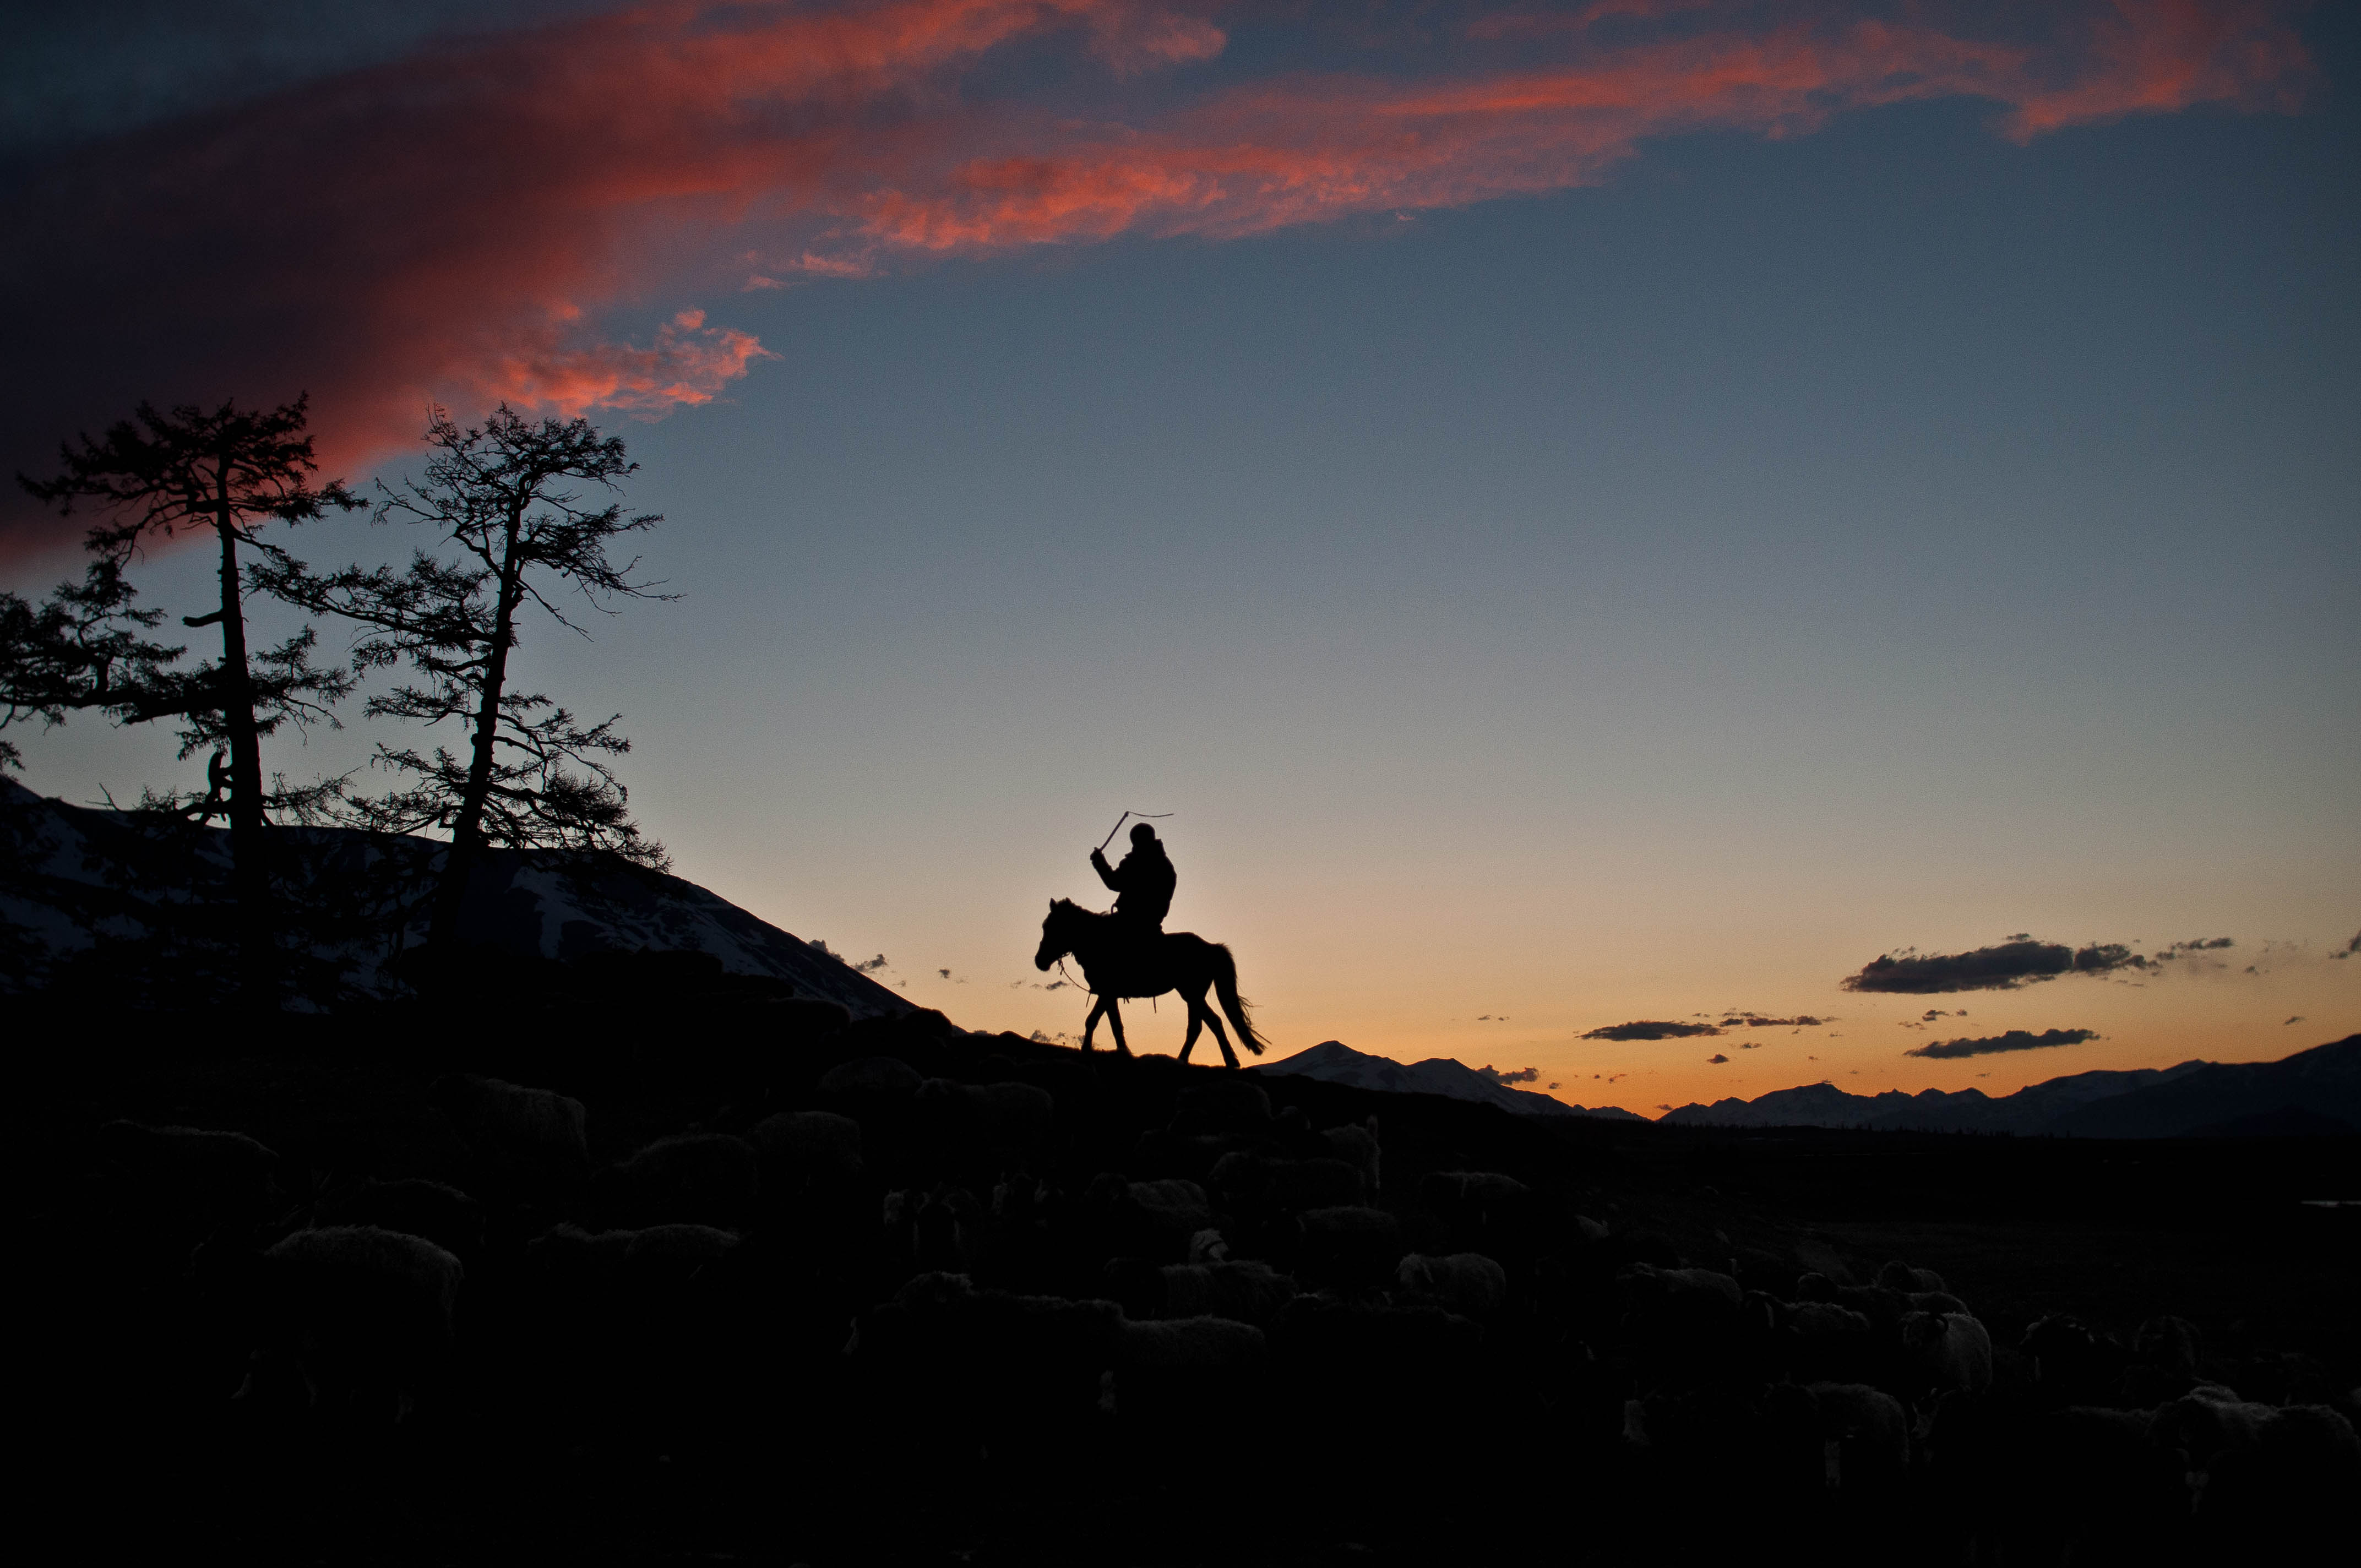 As the sun sets for Sailau, he helps to herd the livestock back in. Unlike the past when his ancestors depended on eagle hunting to survive long winters, modern cities and technology have rendered the tradition redundant.